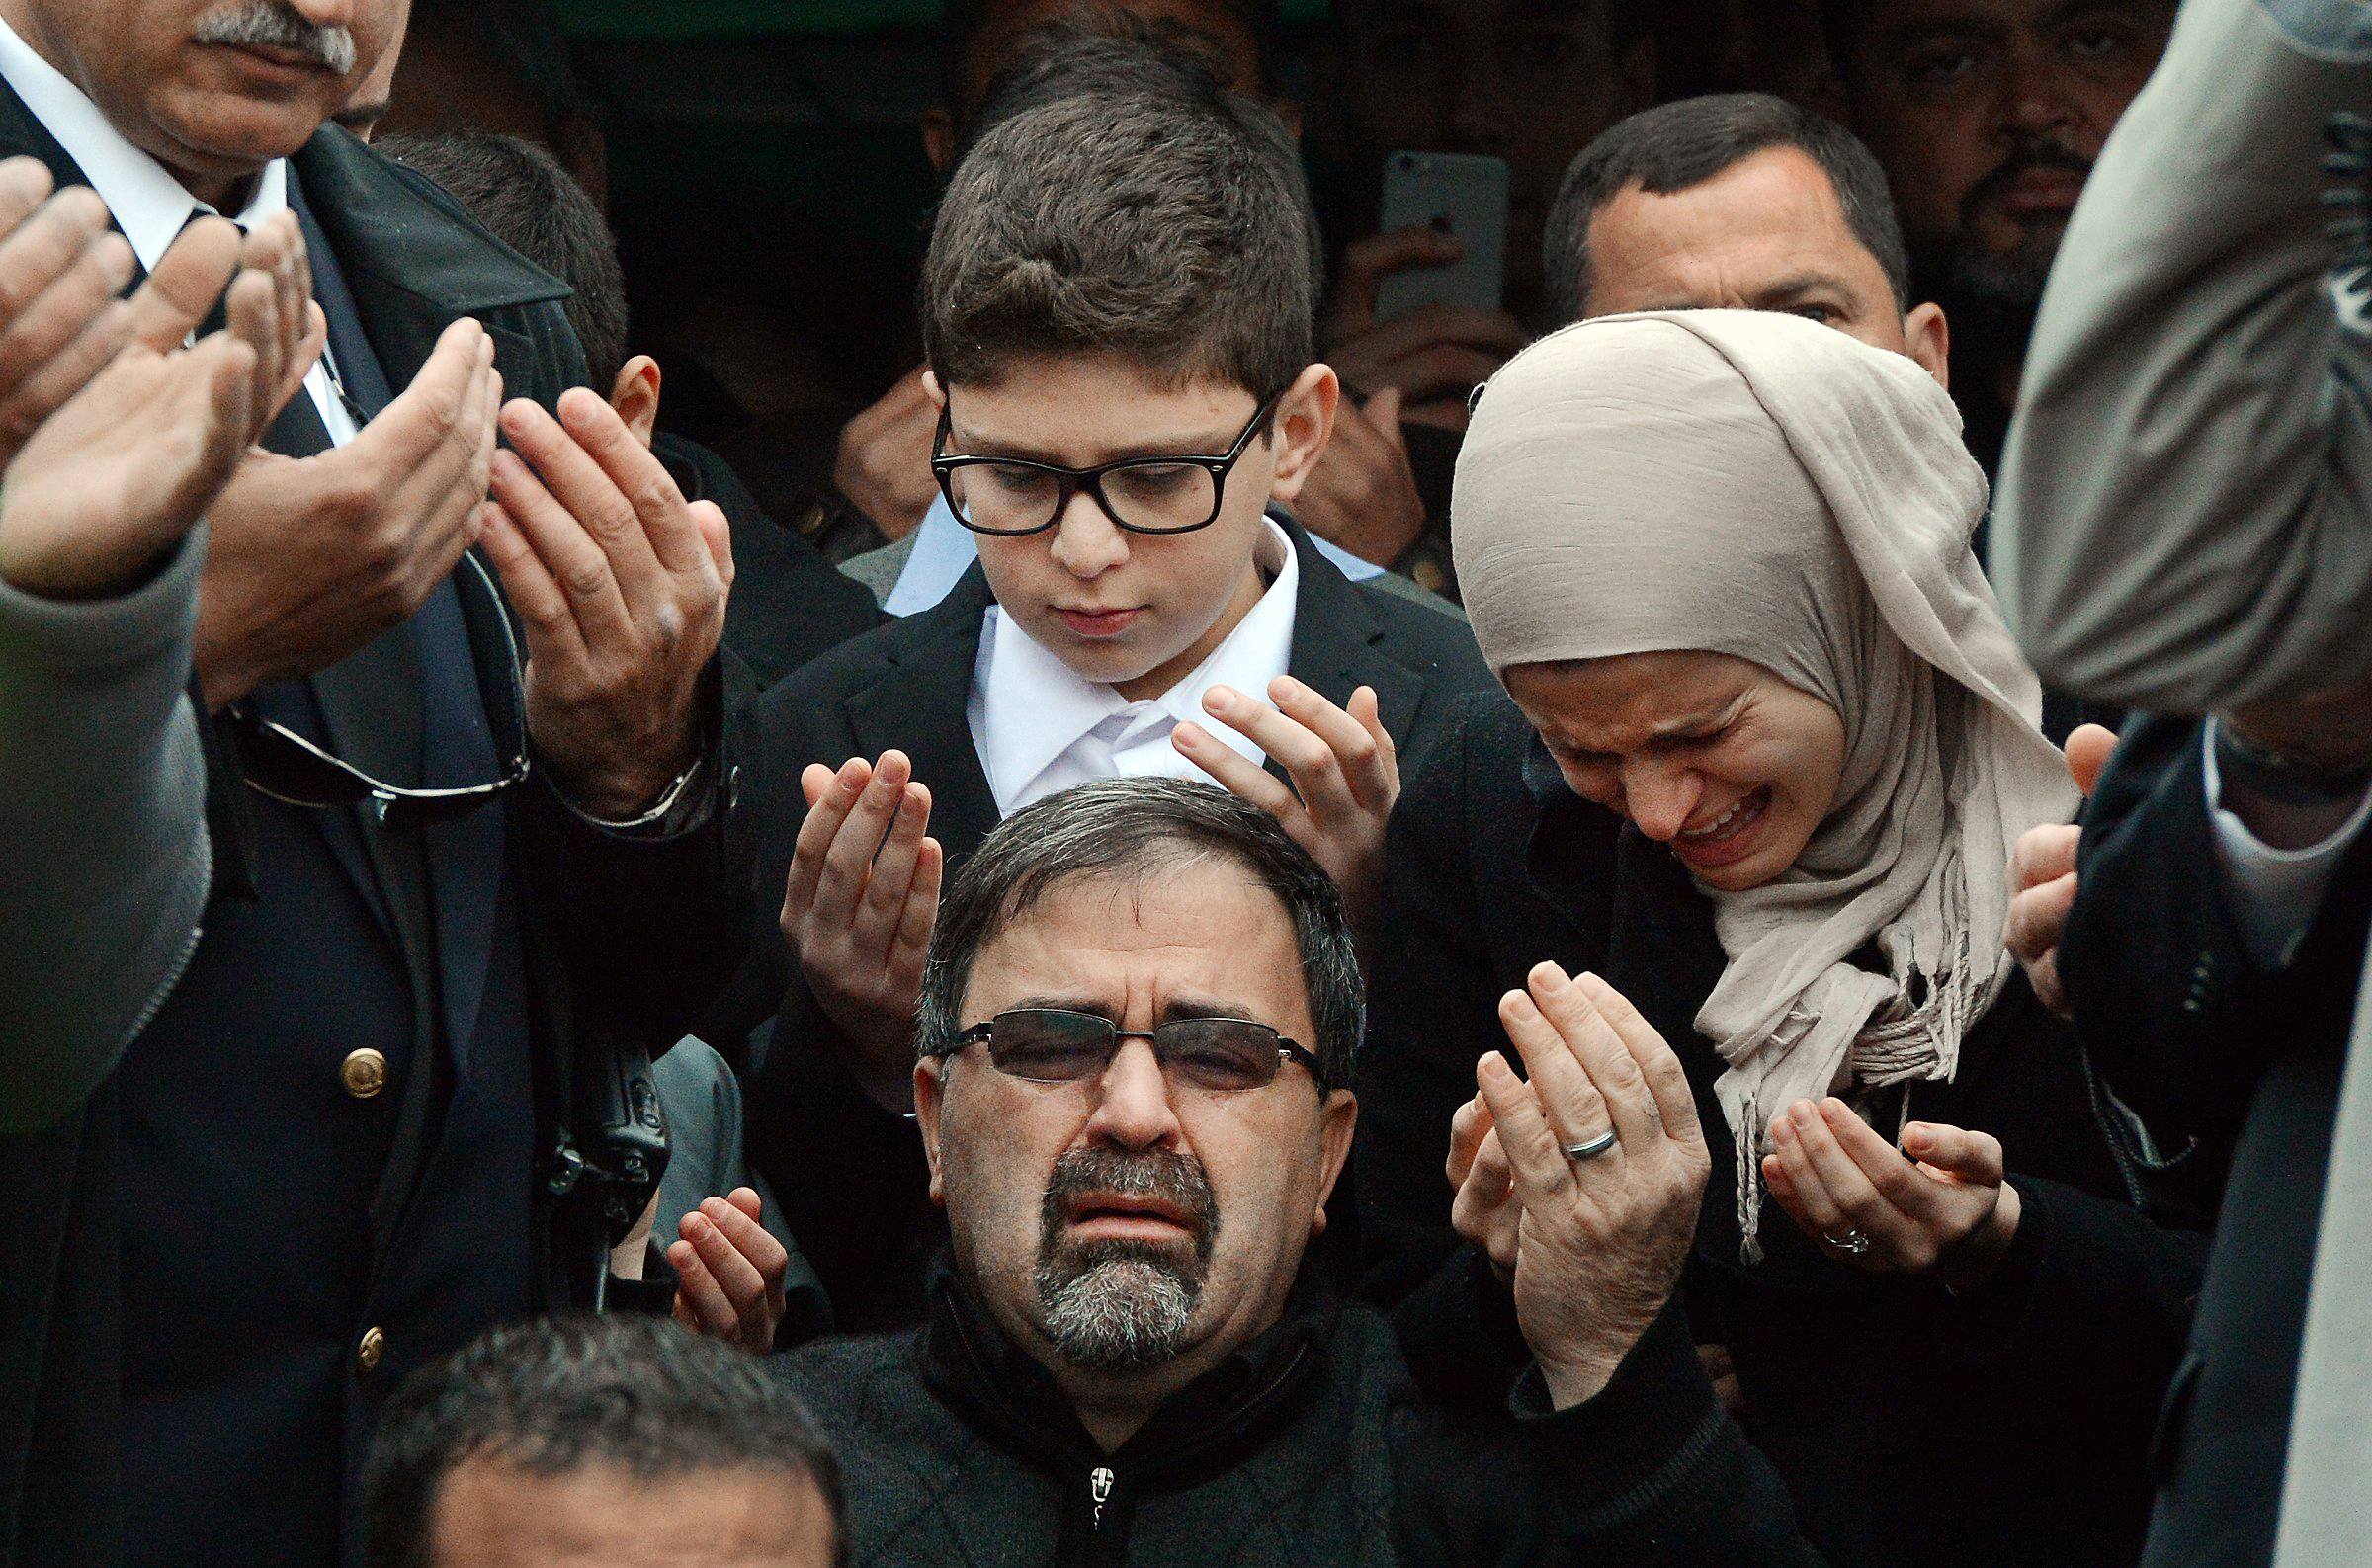 Namee Barakat, center, watches during funeral services for his son, Deah Shaddy Barakat, Feb. 12, 2015, in Wendell, N.C.